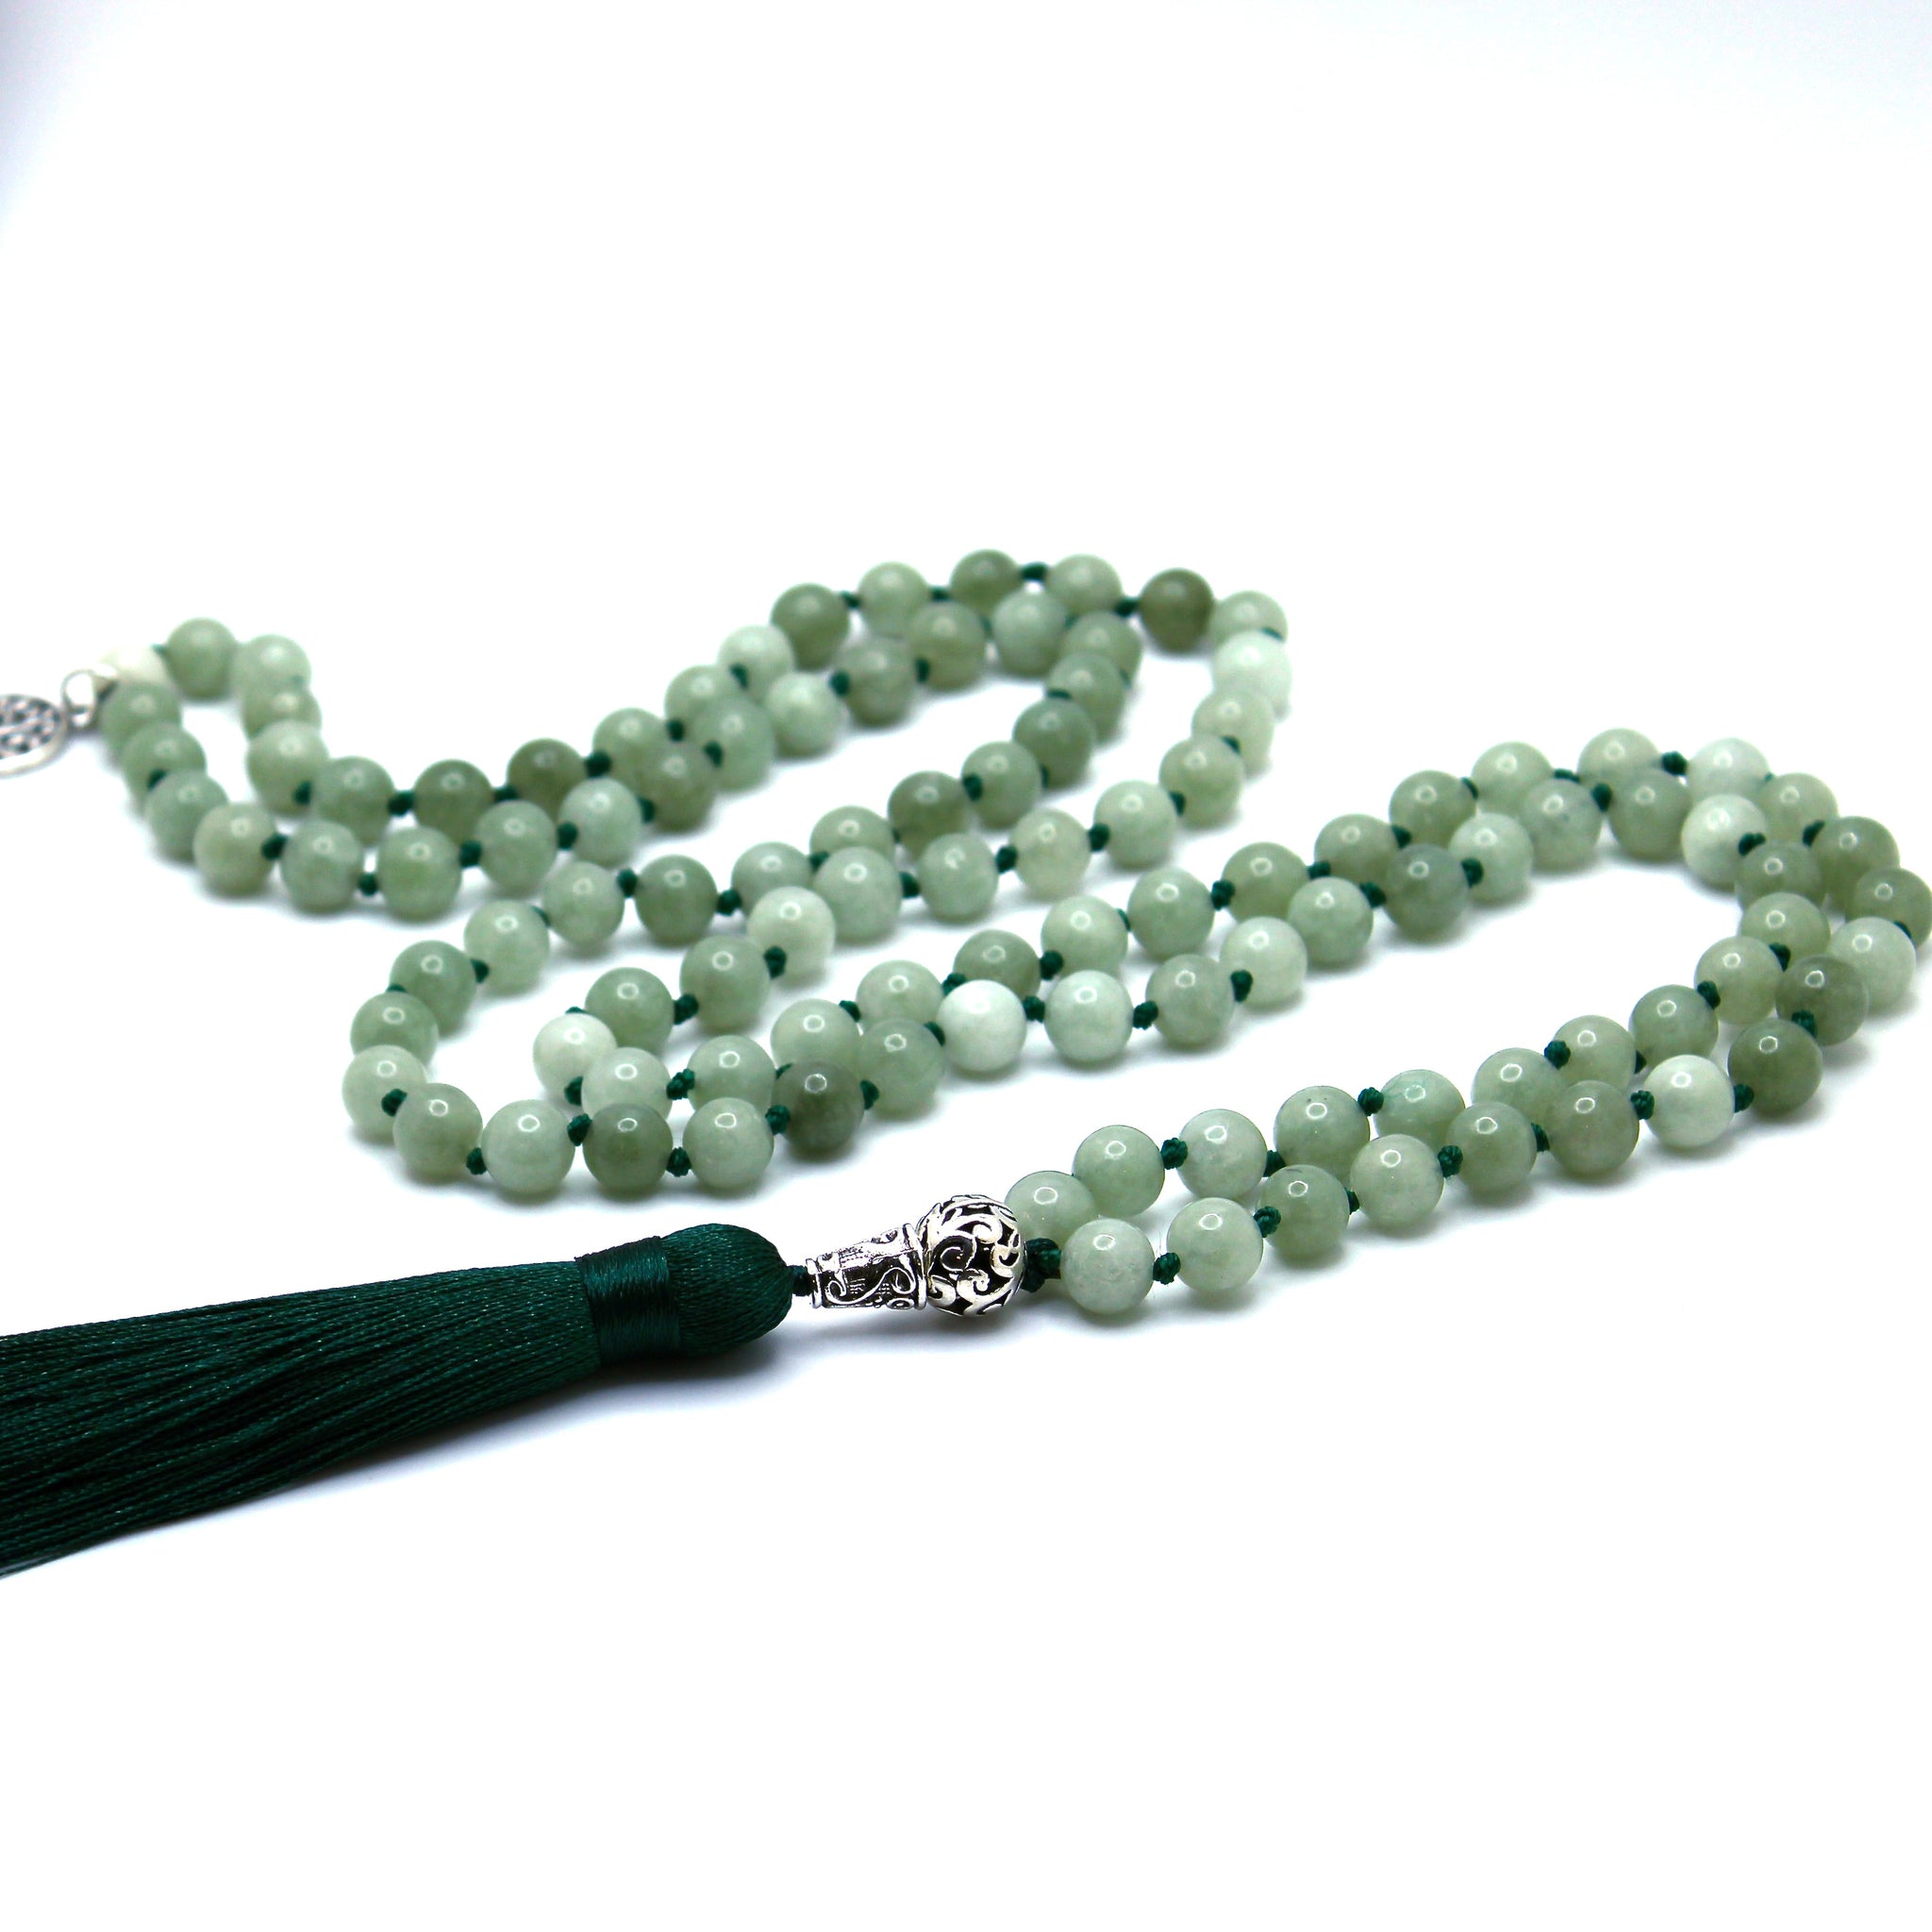 108 Natural Burma Jade Knotted Mala Necklace with Green Silk Tassel